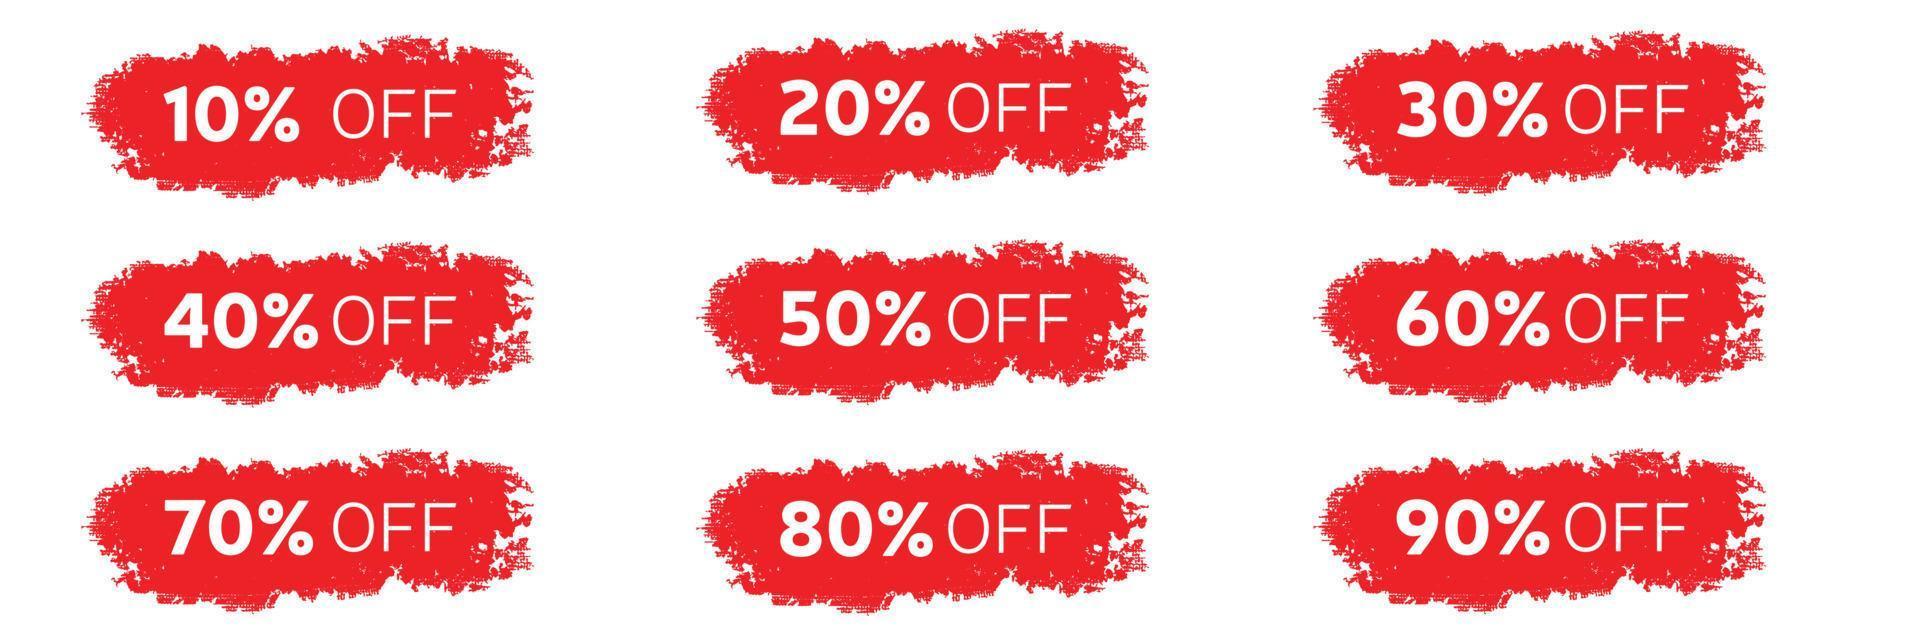 Percent discount sale promotion off isolated on white background. 10 20 30 40 50 60 70 80 and 90 percent off vector